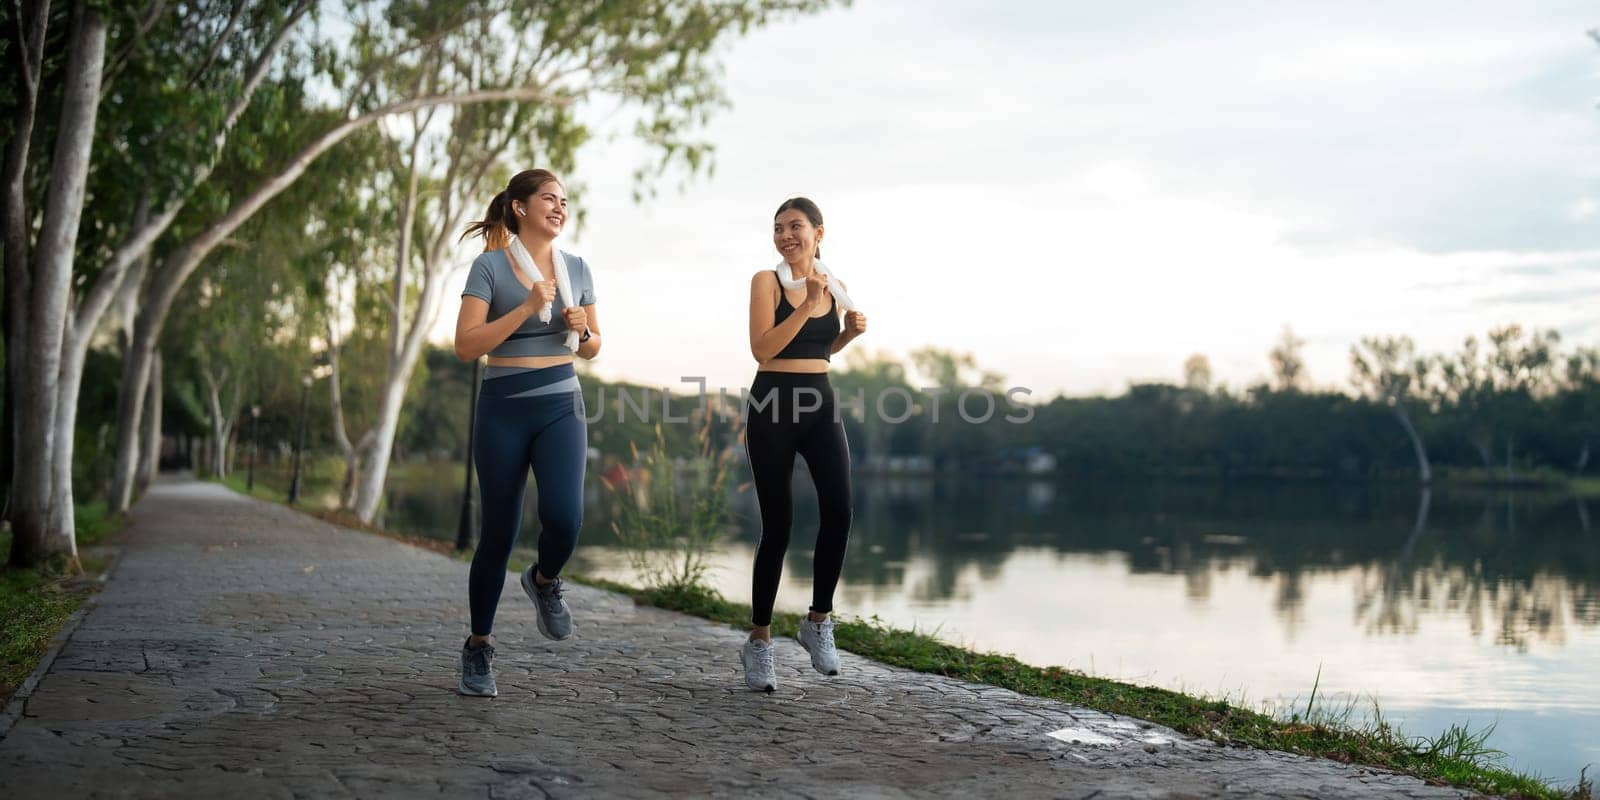 Healthy and active lifestyle, sport concept. Attractive ecstatic young sportswoman, smiling joyfully as jogging, sprinter run in park by nateemee